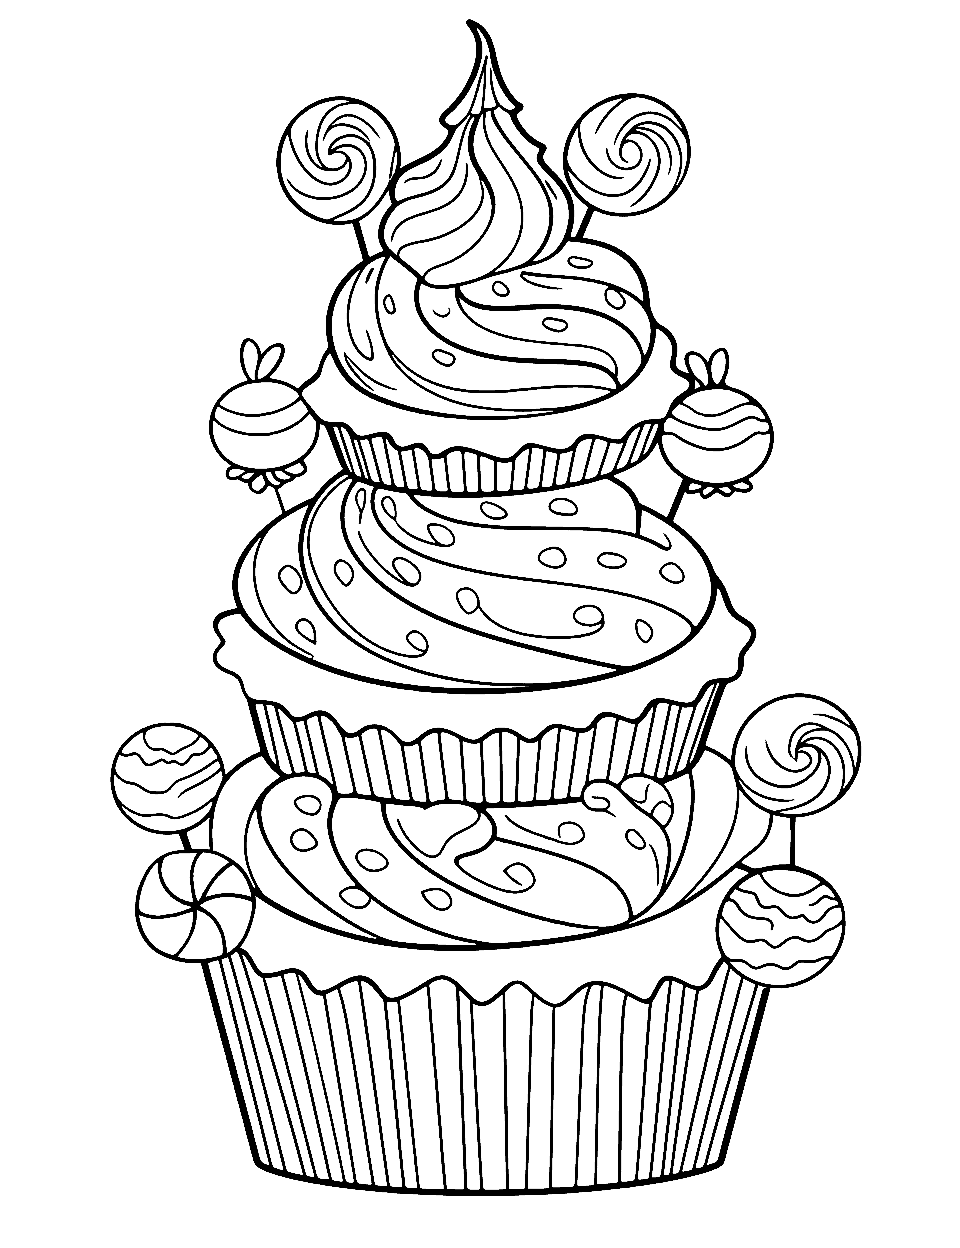 Tasty Cupcake Tower Candy Coloring Page - A tall tower made of colorful and intricately decorated cupcakes.